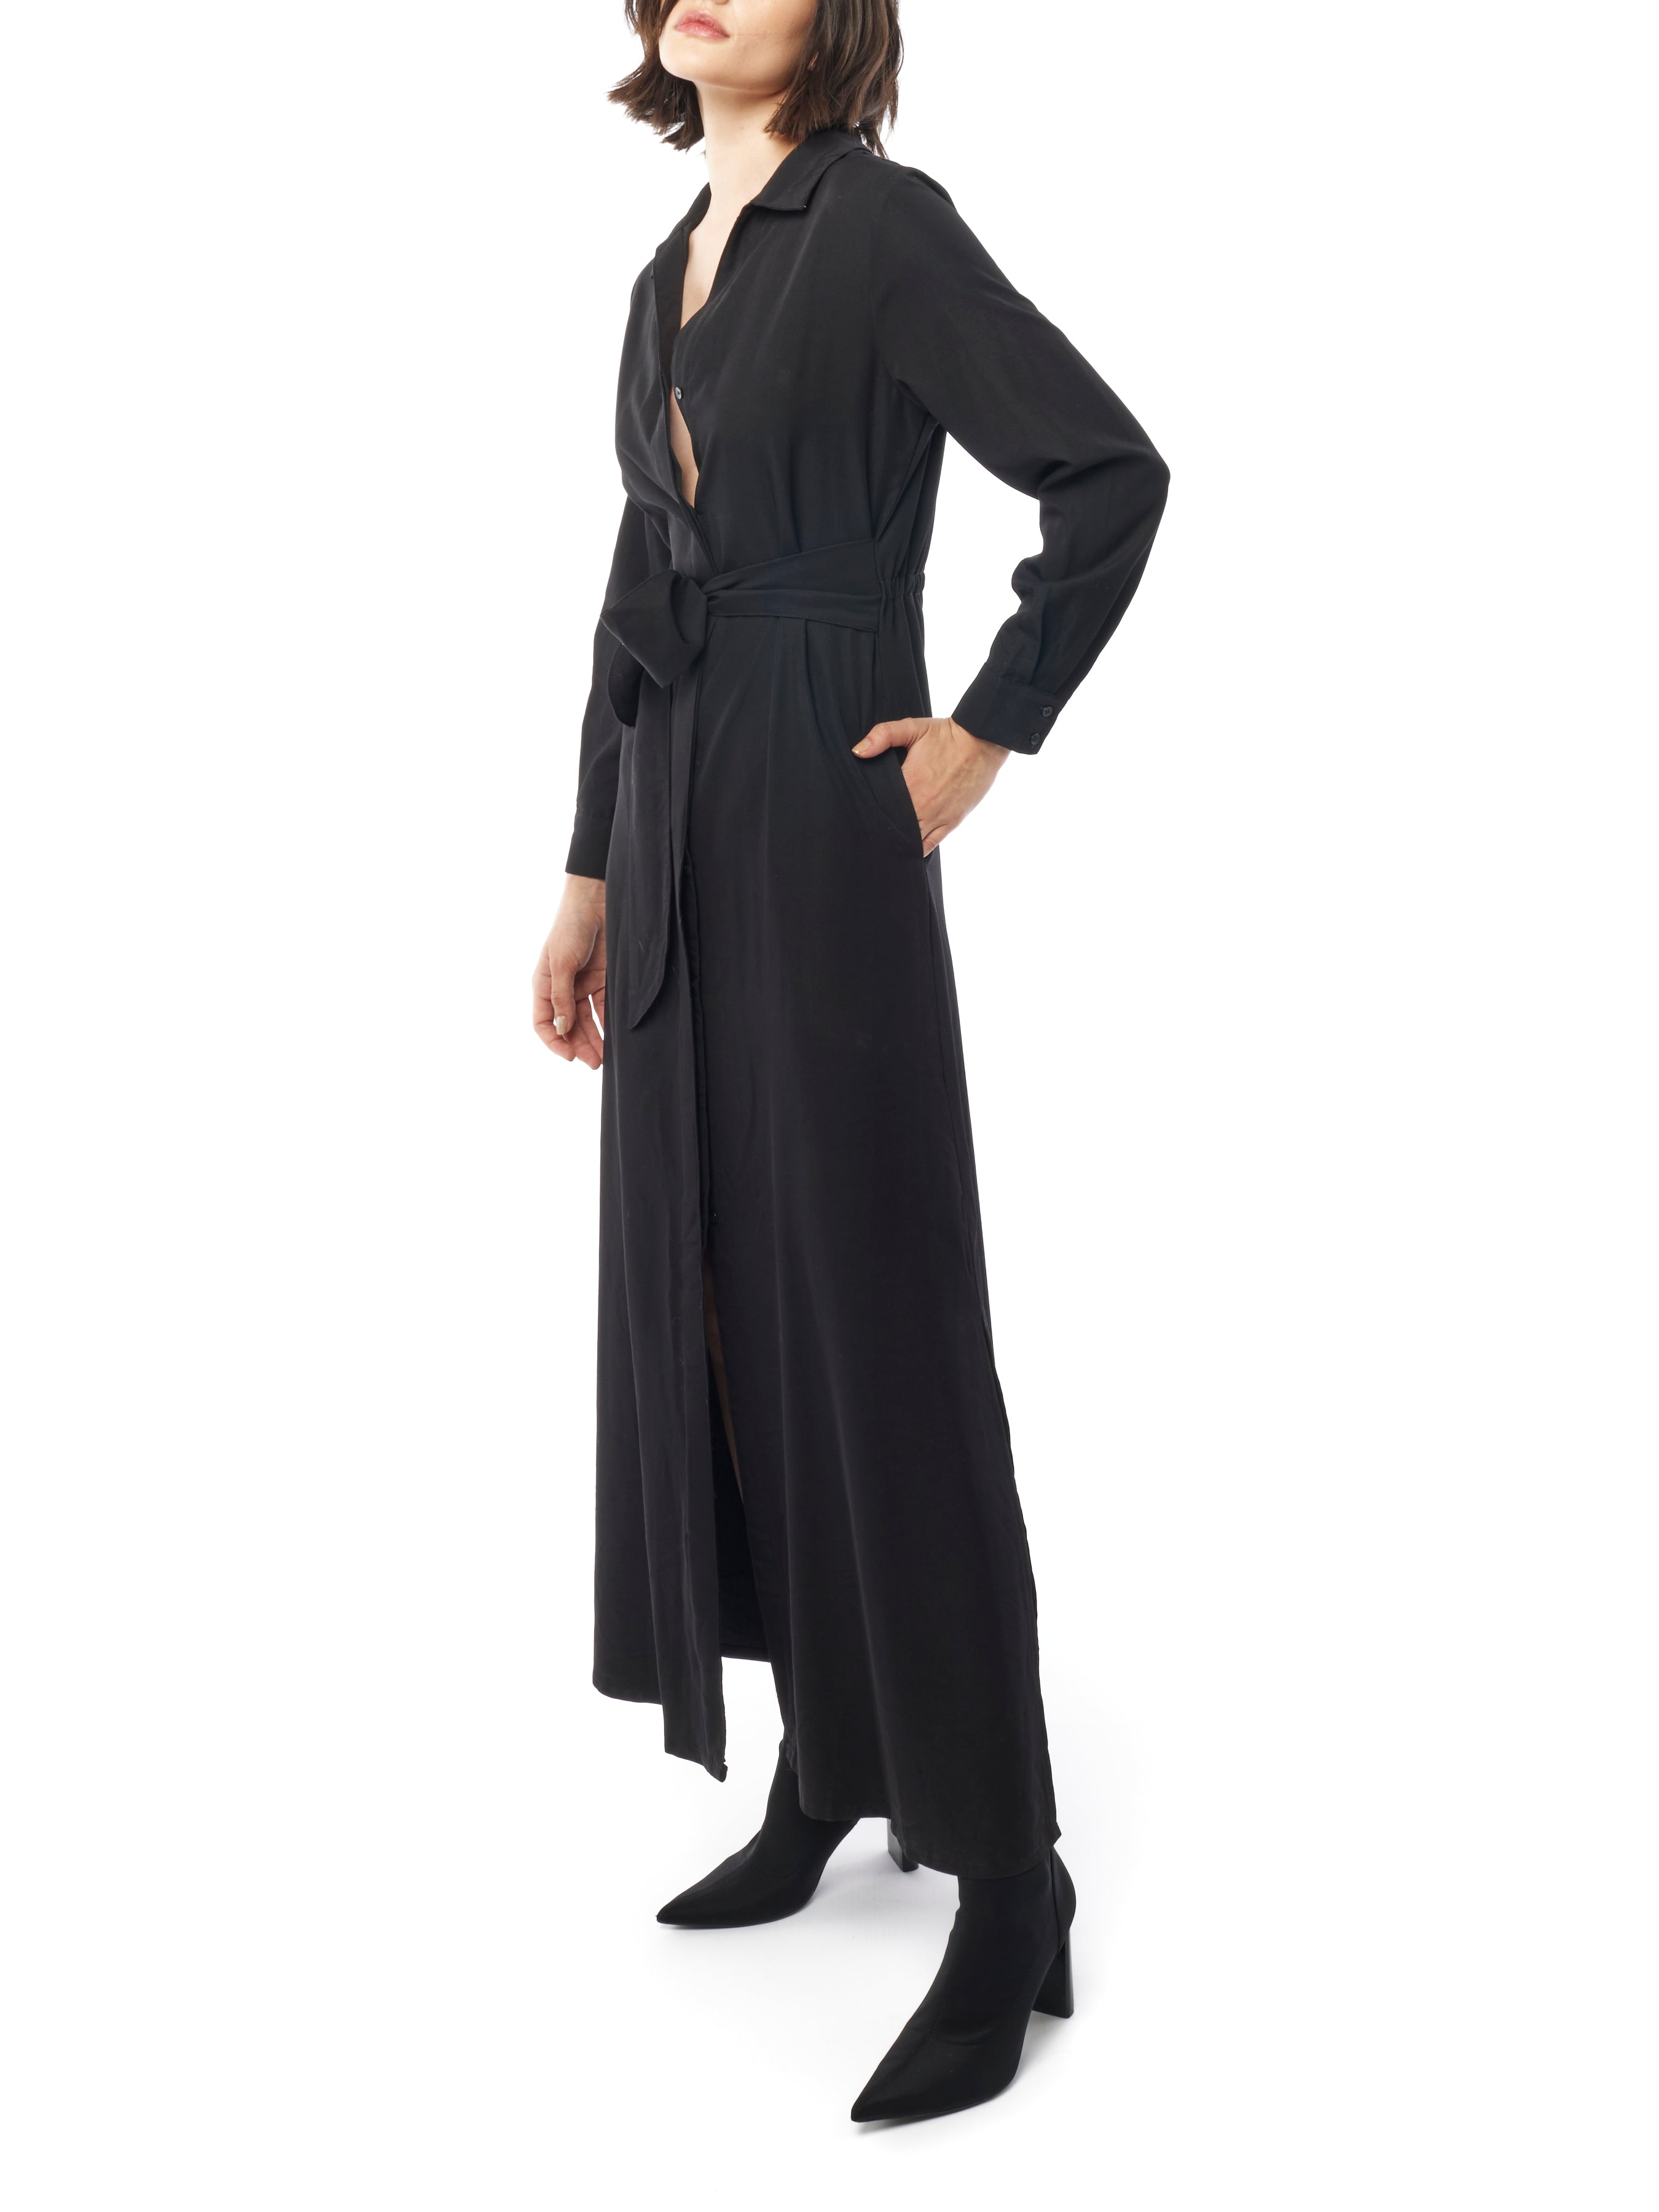 Long collared black dress with button down front, long cuffed sleeves and pockets. Side view 2